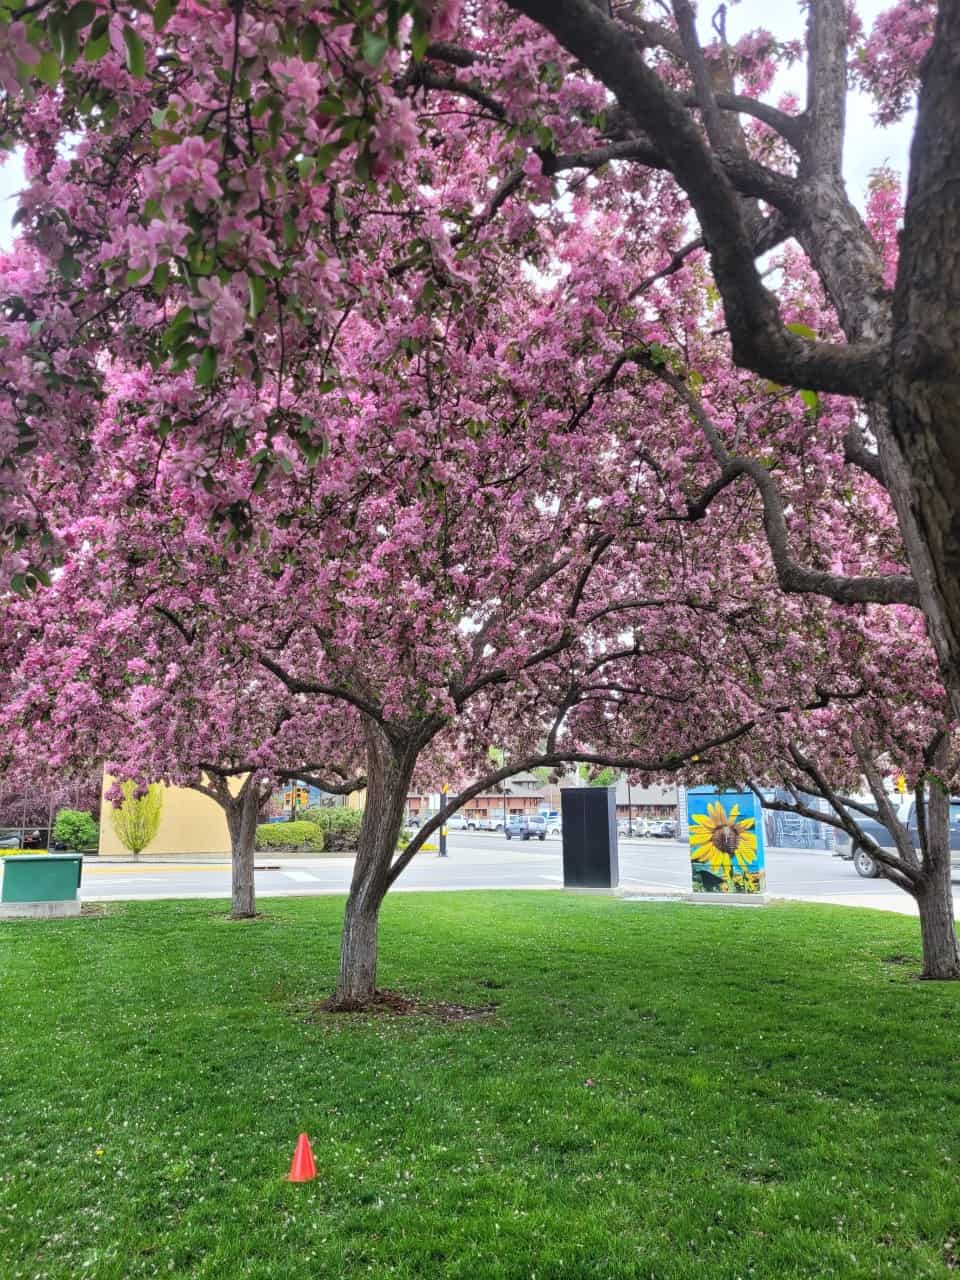 Vernon City Hall blossoming trees - Vernon City hall's main walkway is beautiful this time of year with these blossoming trees!